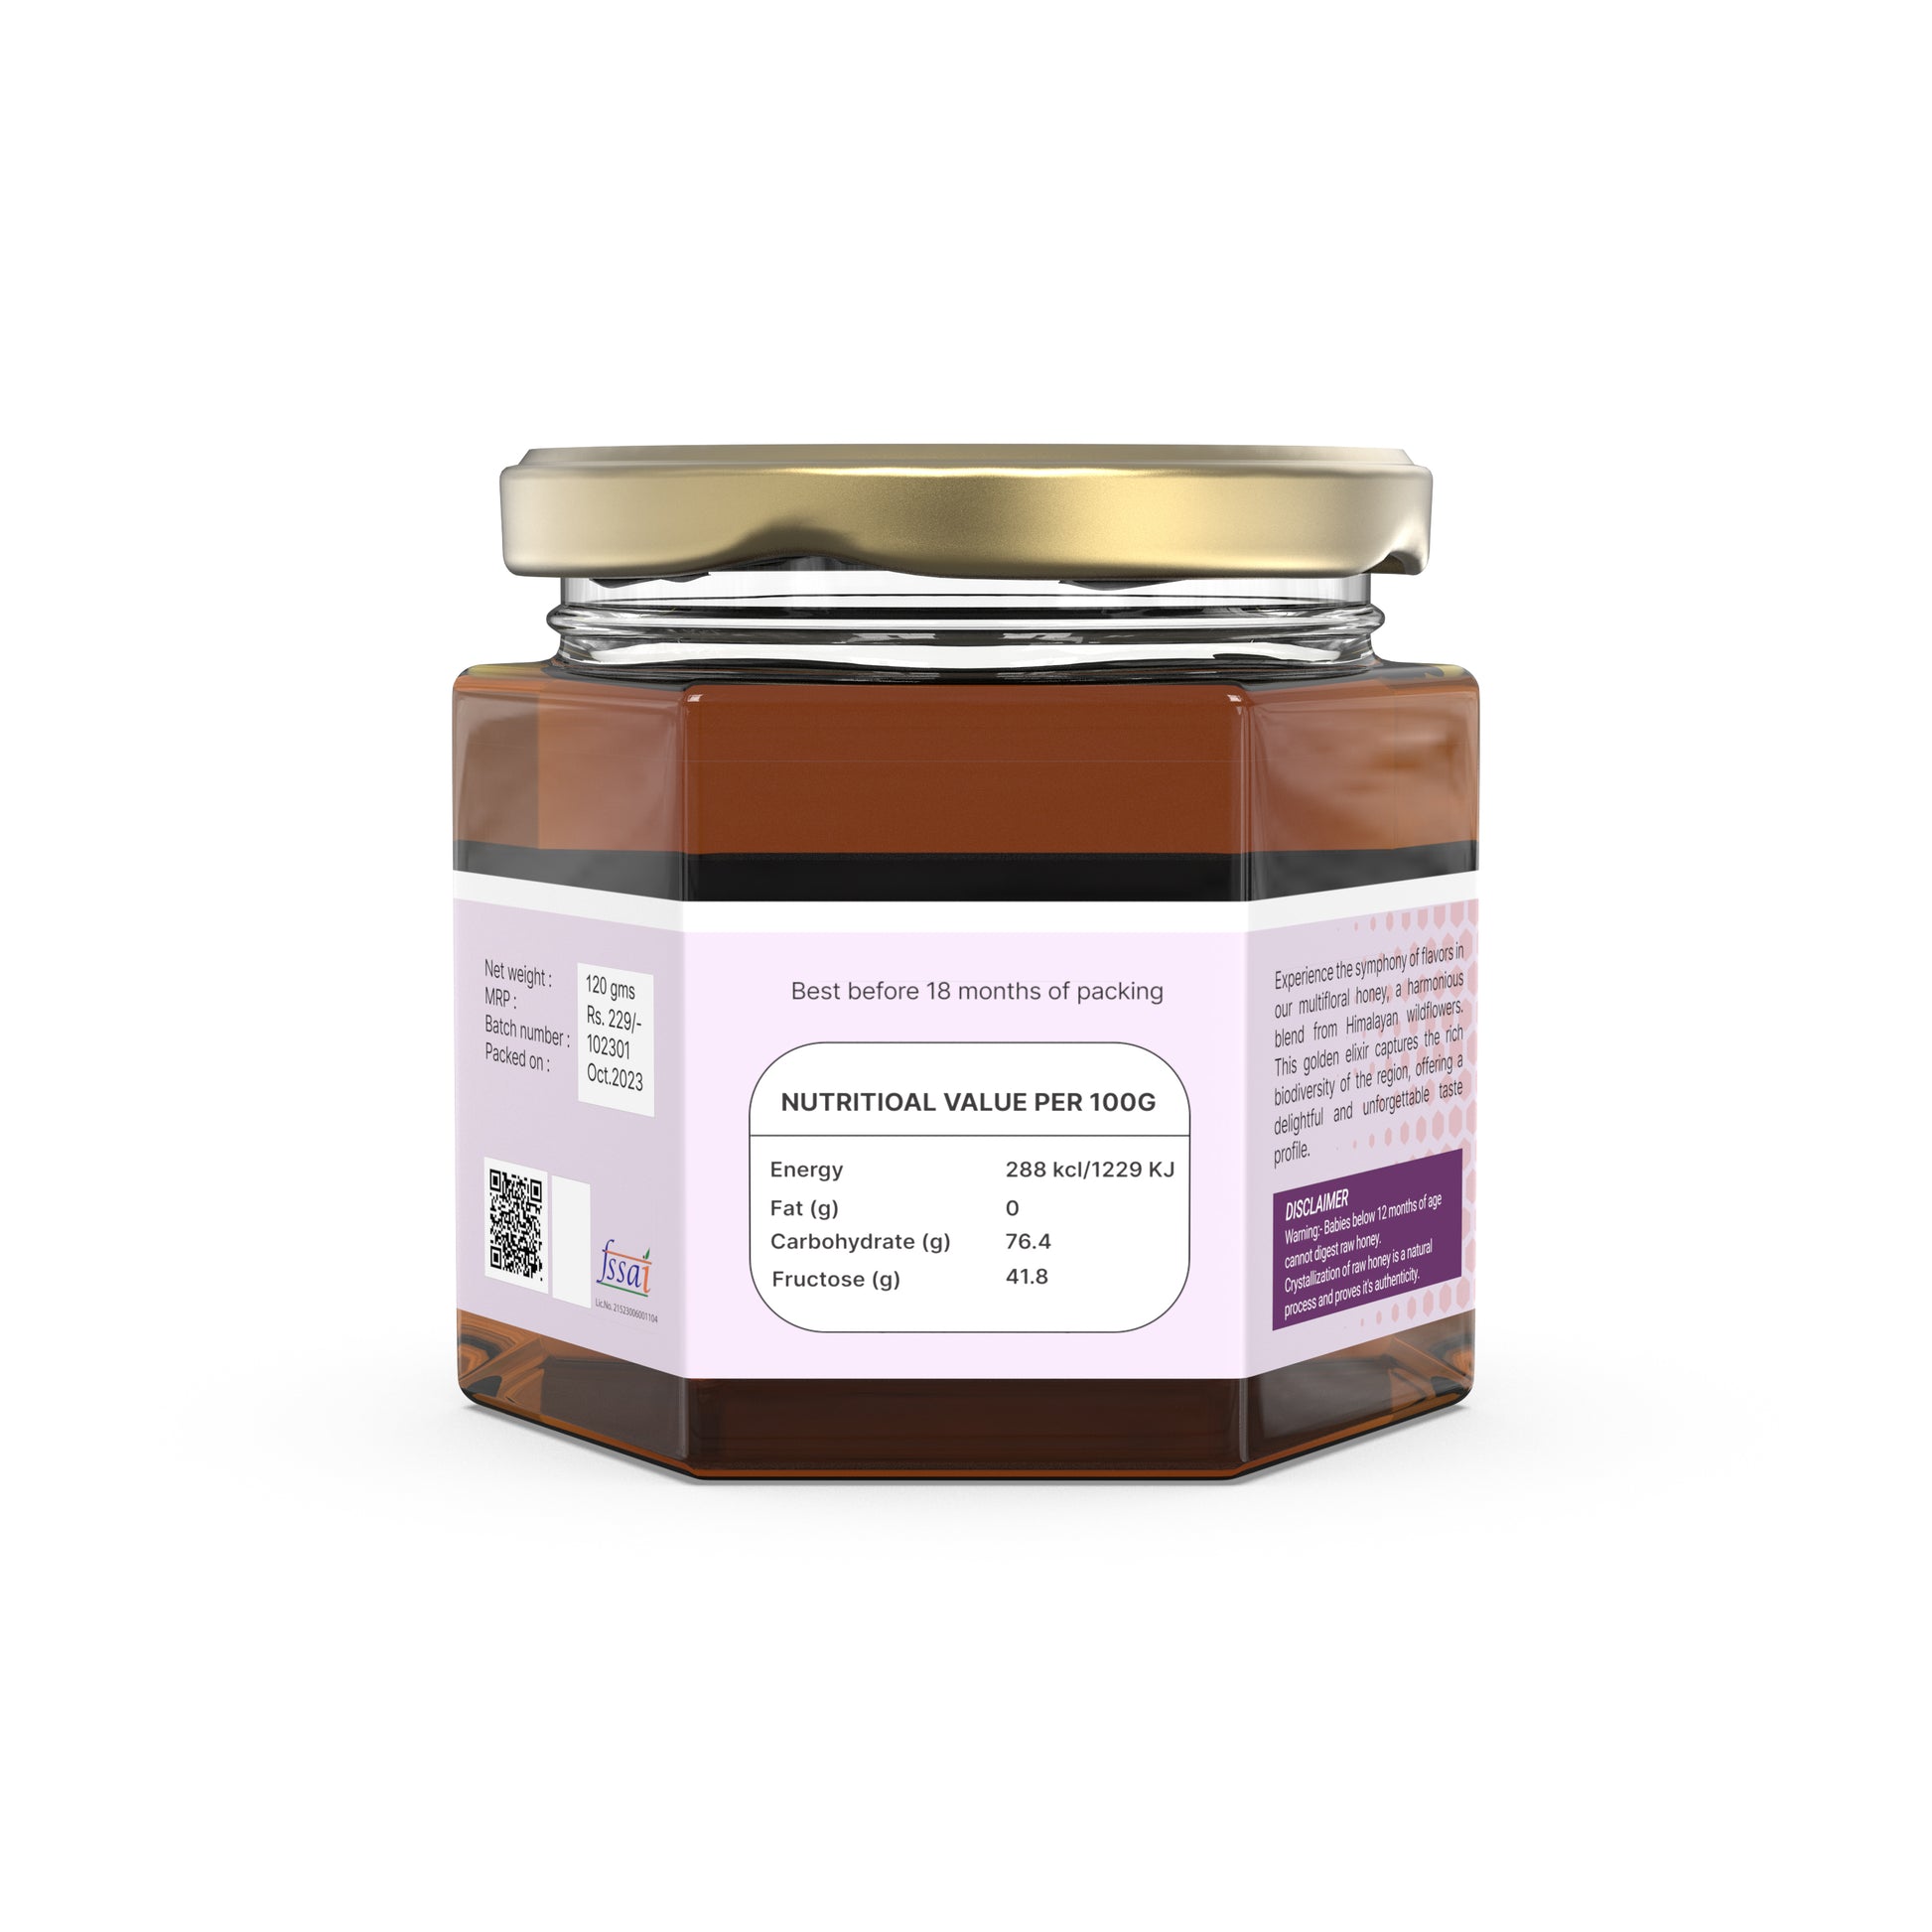 Multifloral honey nutritional content